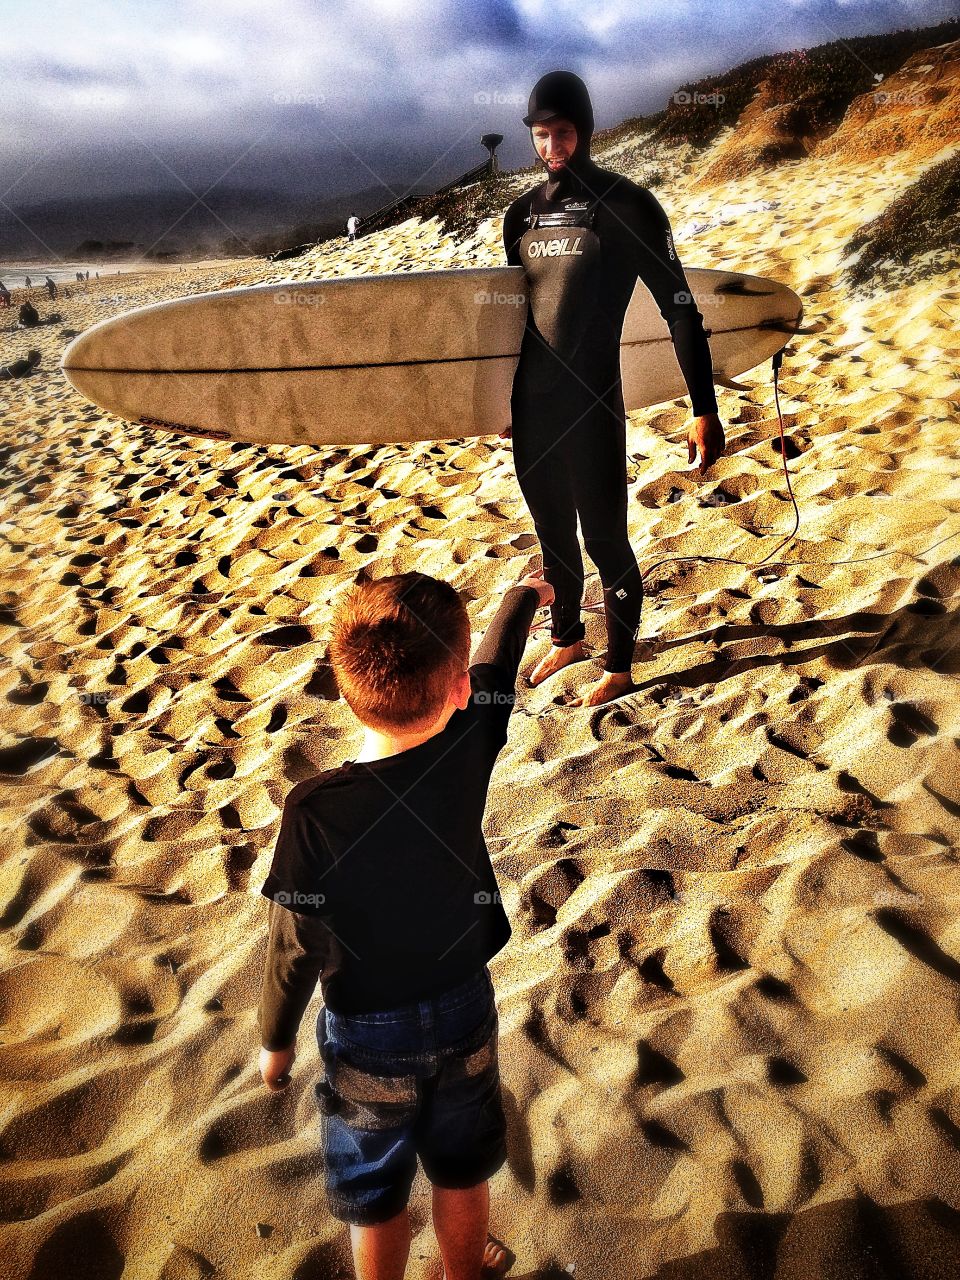 Surfer In The Golden Hour. Young Boy with His Surfer Friend On A Beach Before Sunset
